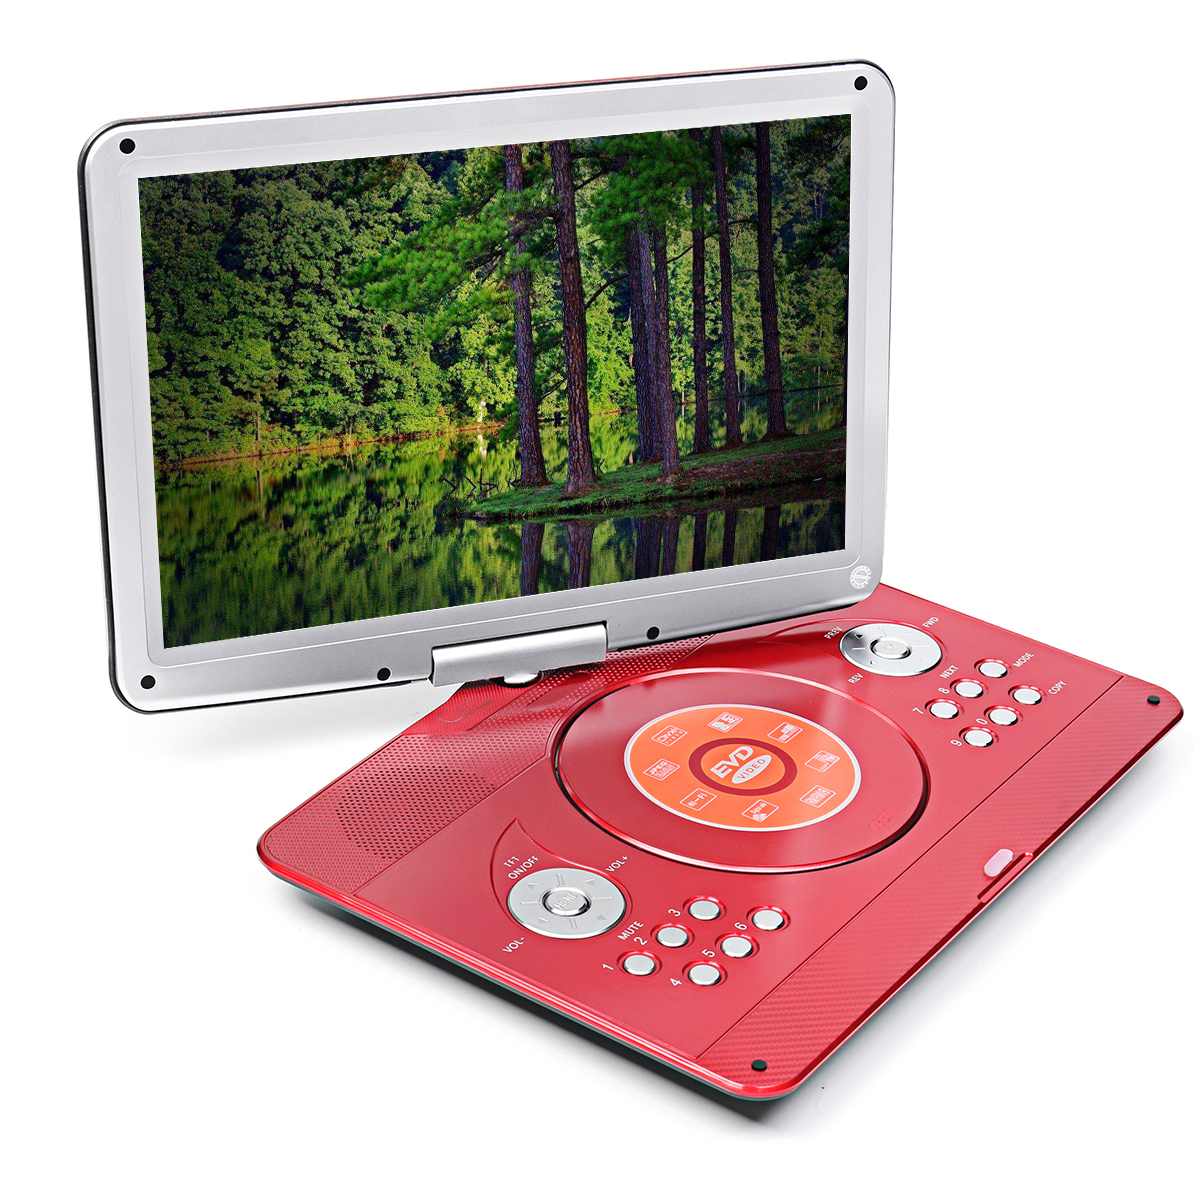 Portable Rotating DVD Player With Screen 14" - Westfield Retailers